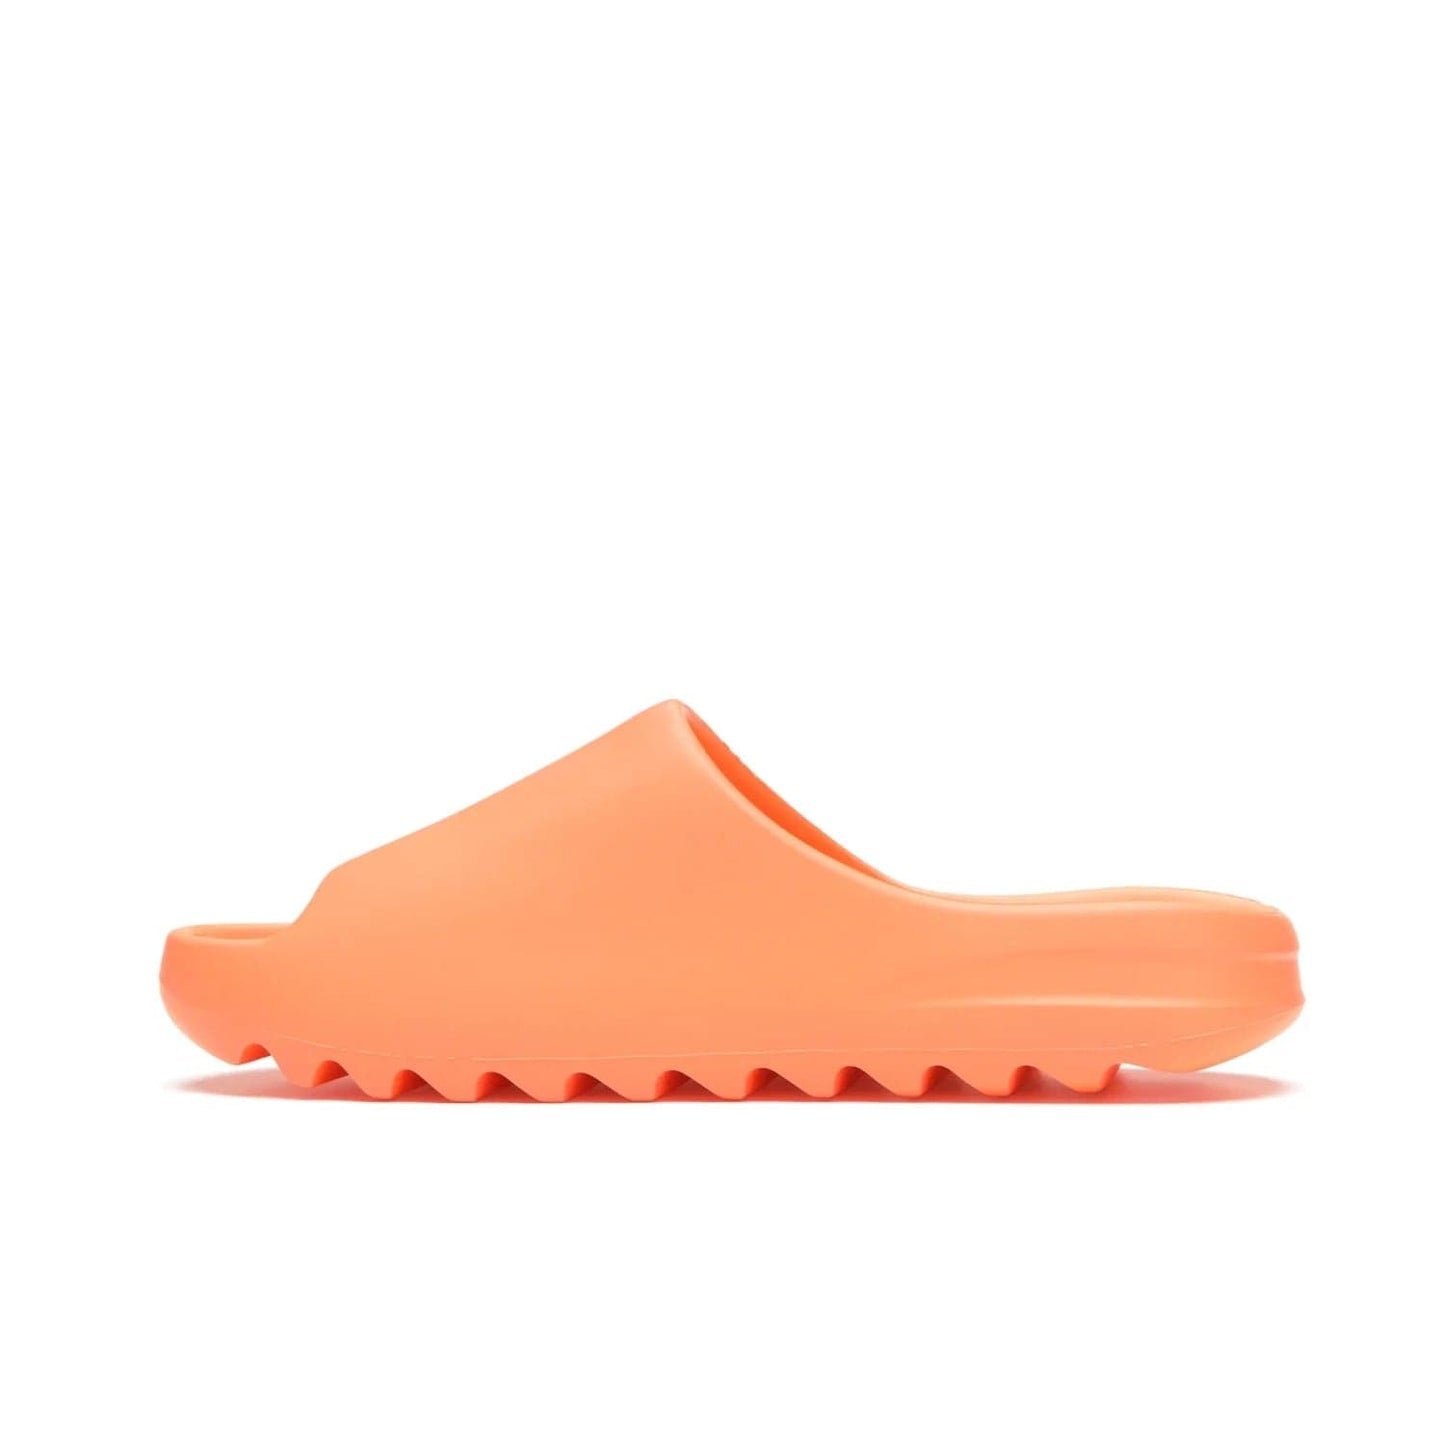 adidas Yeezy Slide Enflame Orange - Image 20 - Only at www.BallersClubKickz.com - Limited edition adidas Yeezy Slide featuring a bold Enflame Orange upper and EVA foam construction. Grooved outsole for traction and support. Released June 2021. Perfect for summer.